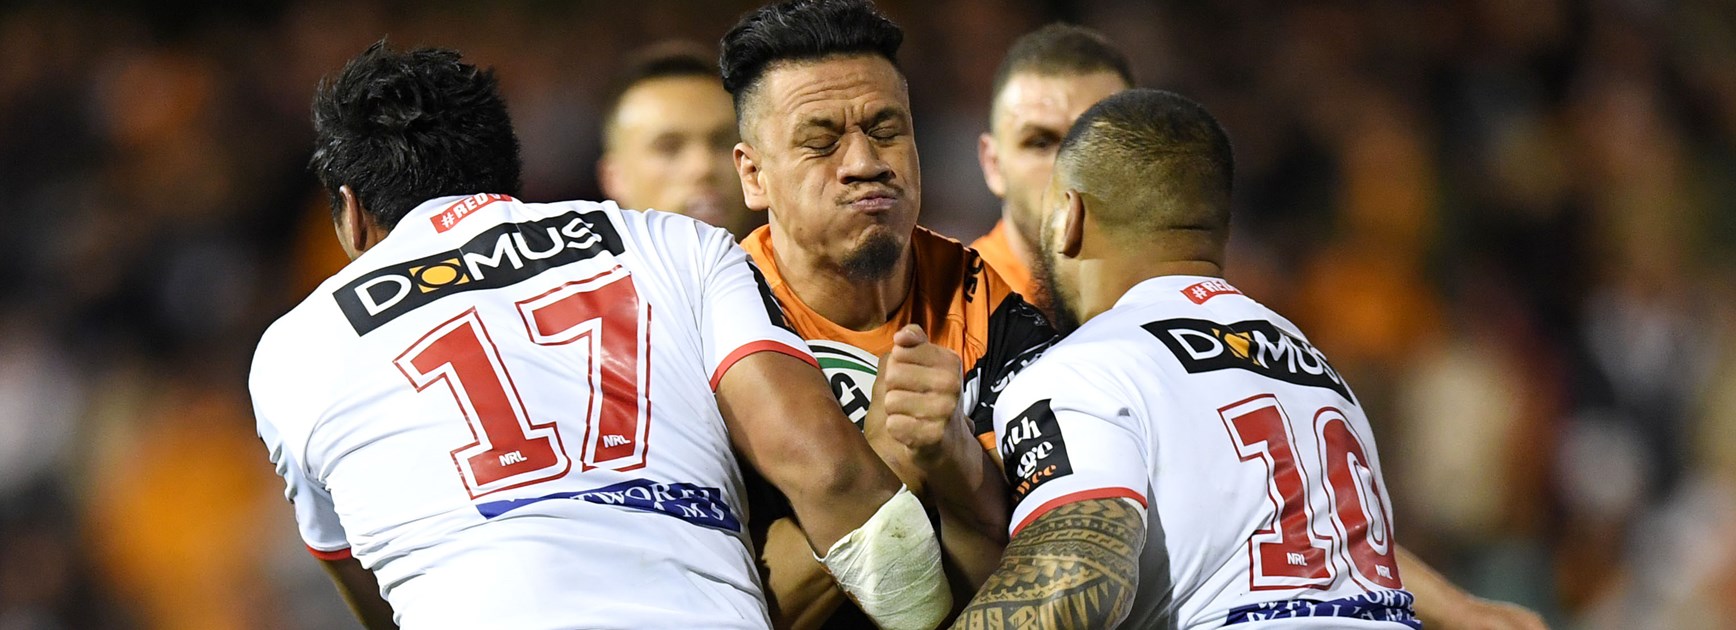 Proud local junior Sue desperate to leave Wests Tigers on high note